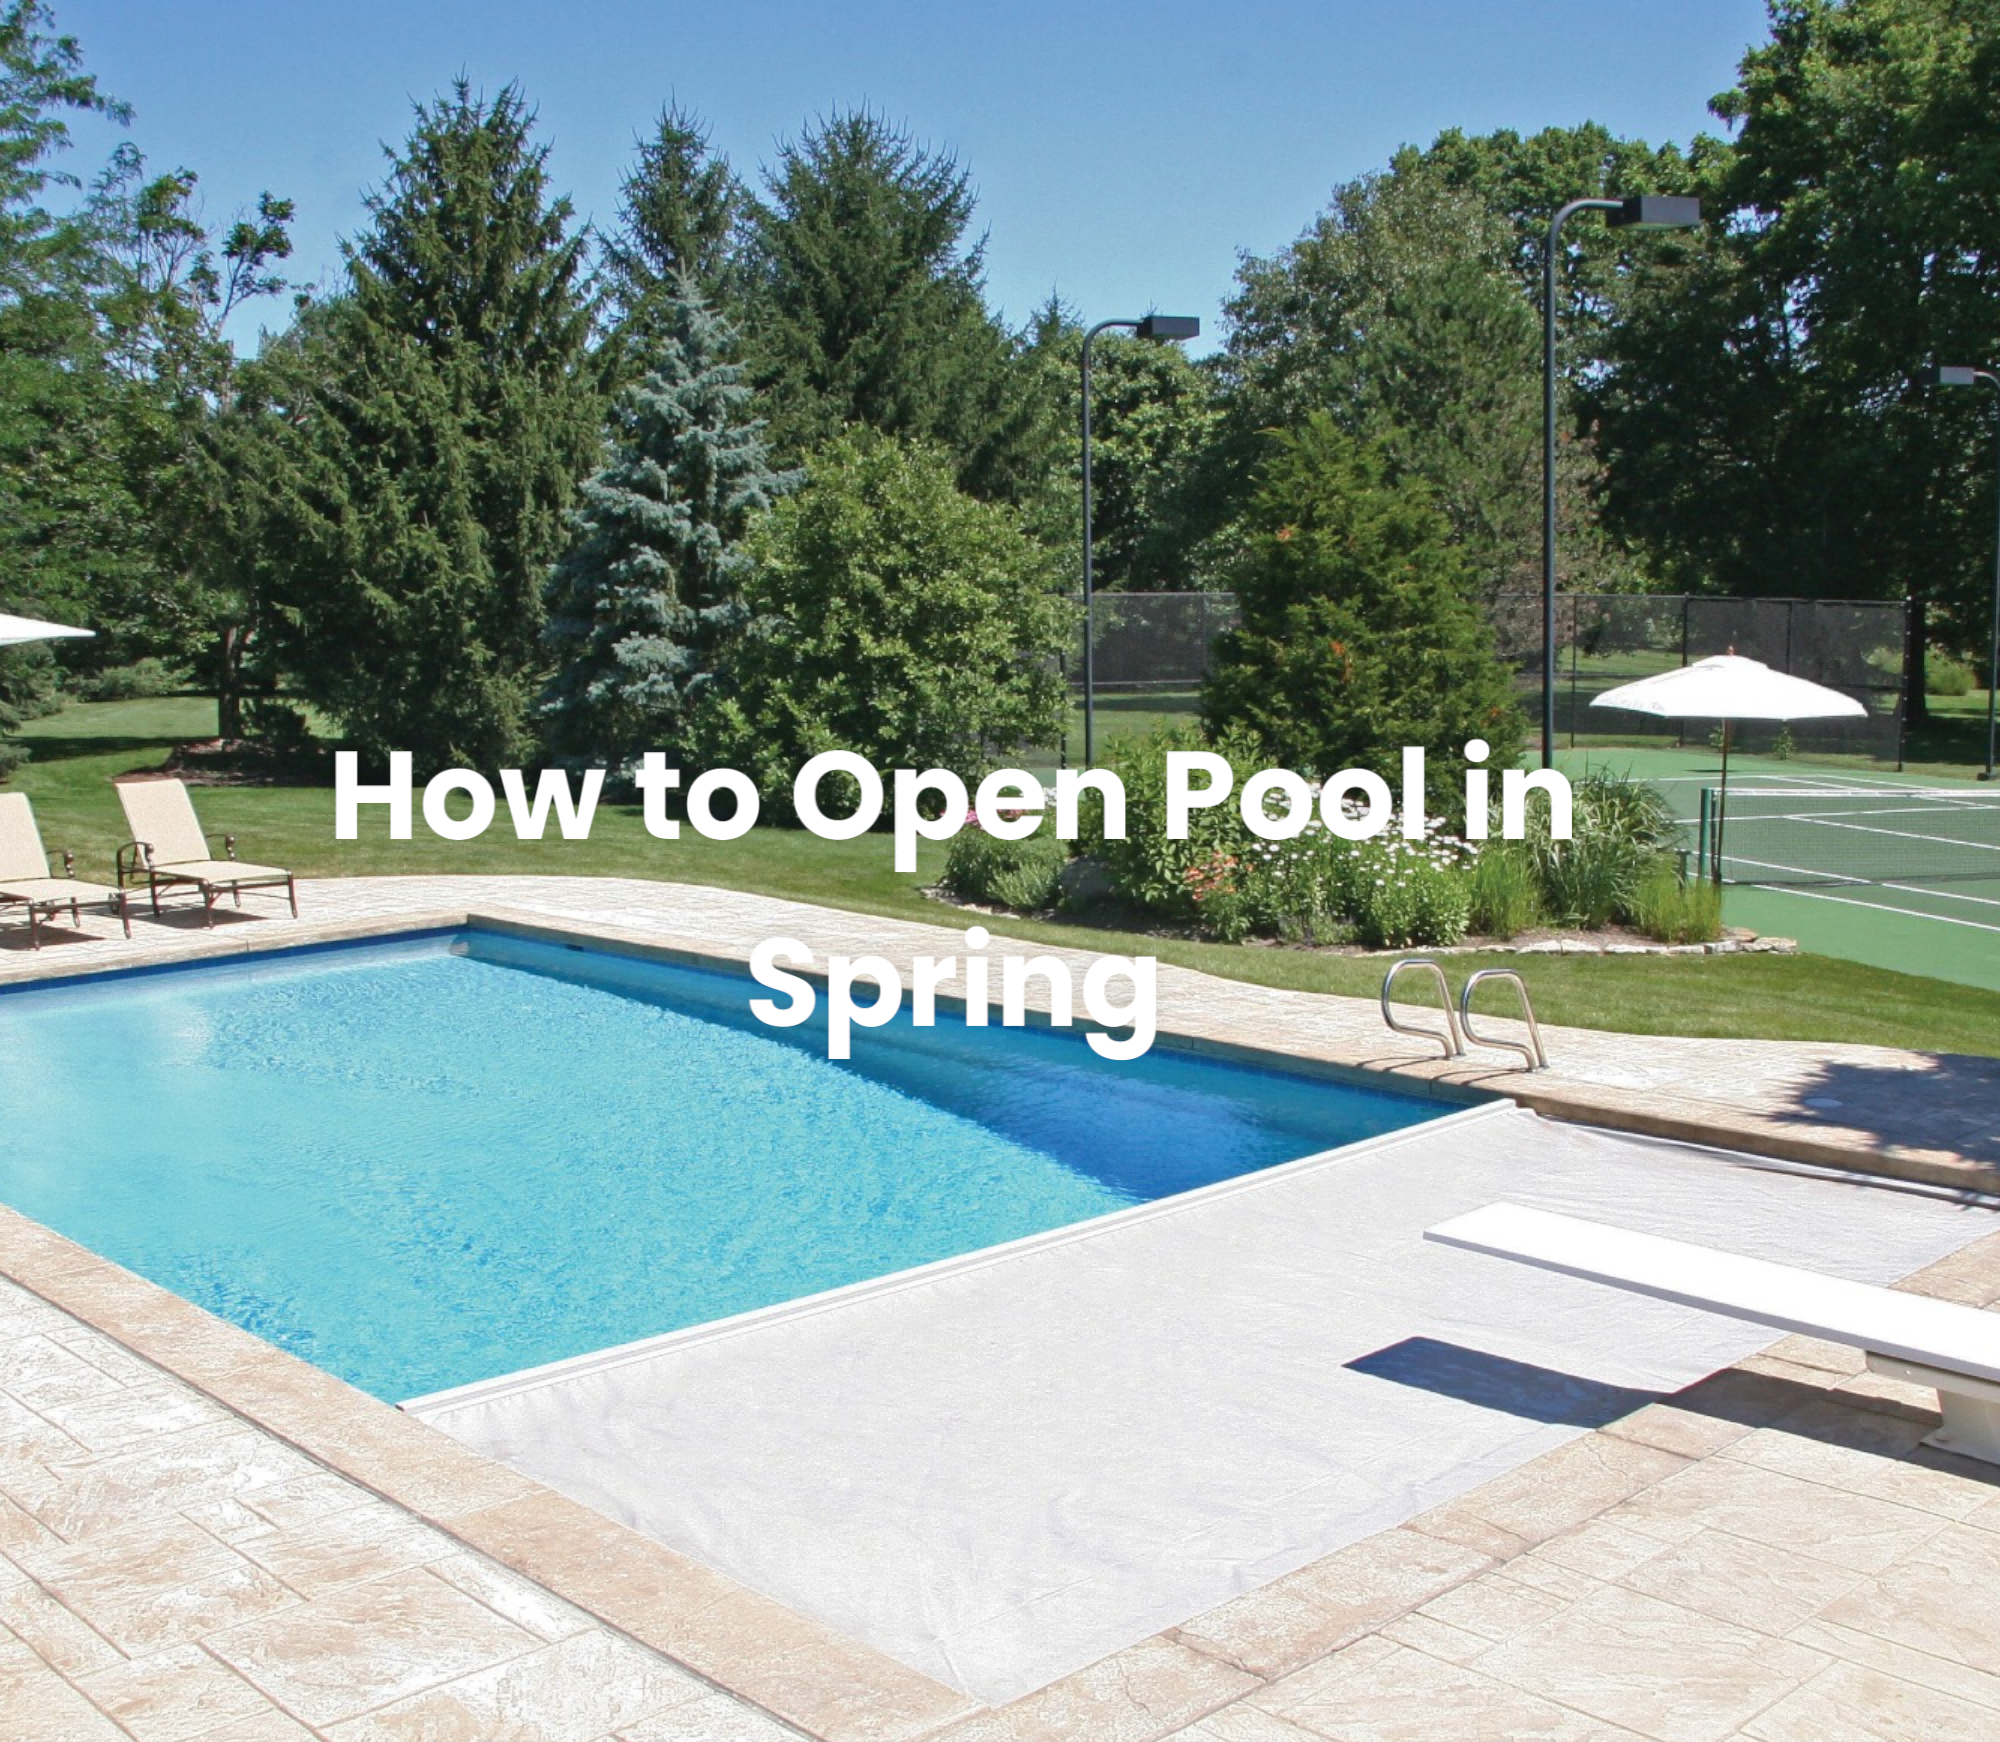 Open Pool in Spring